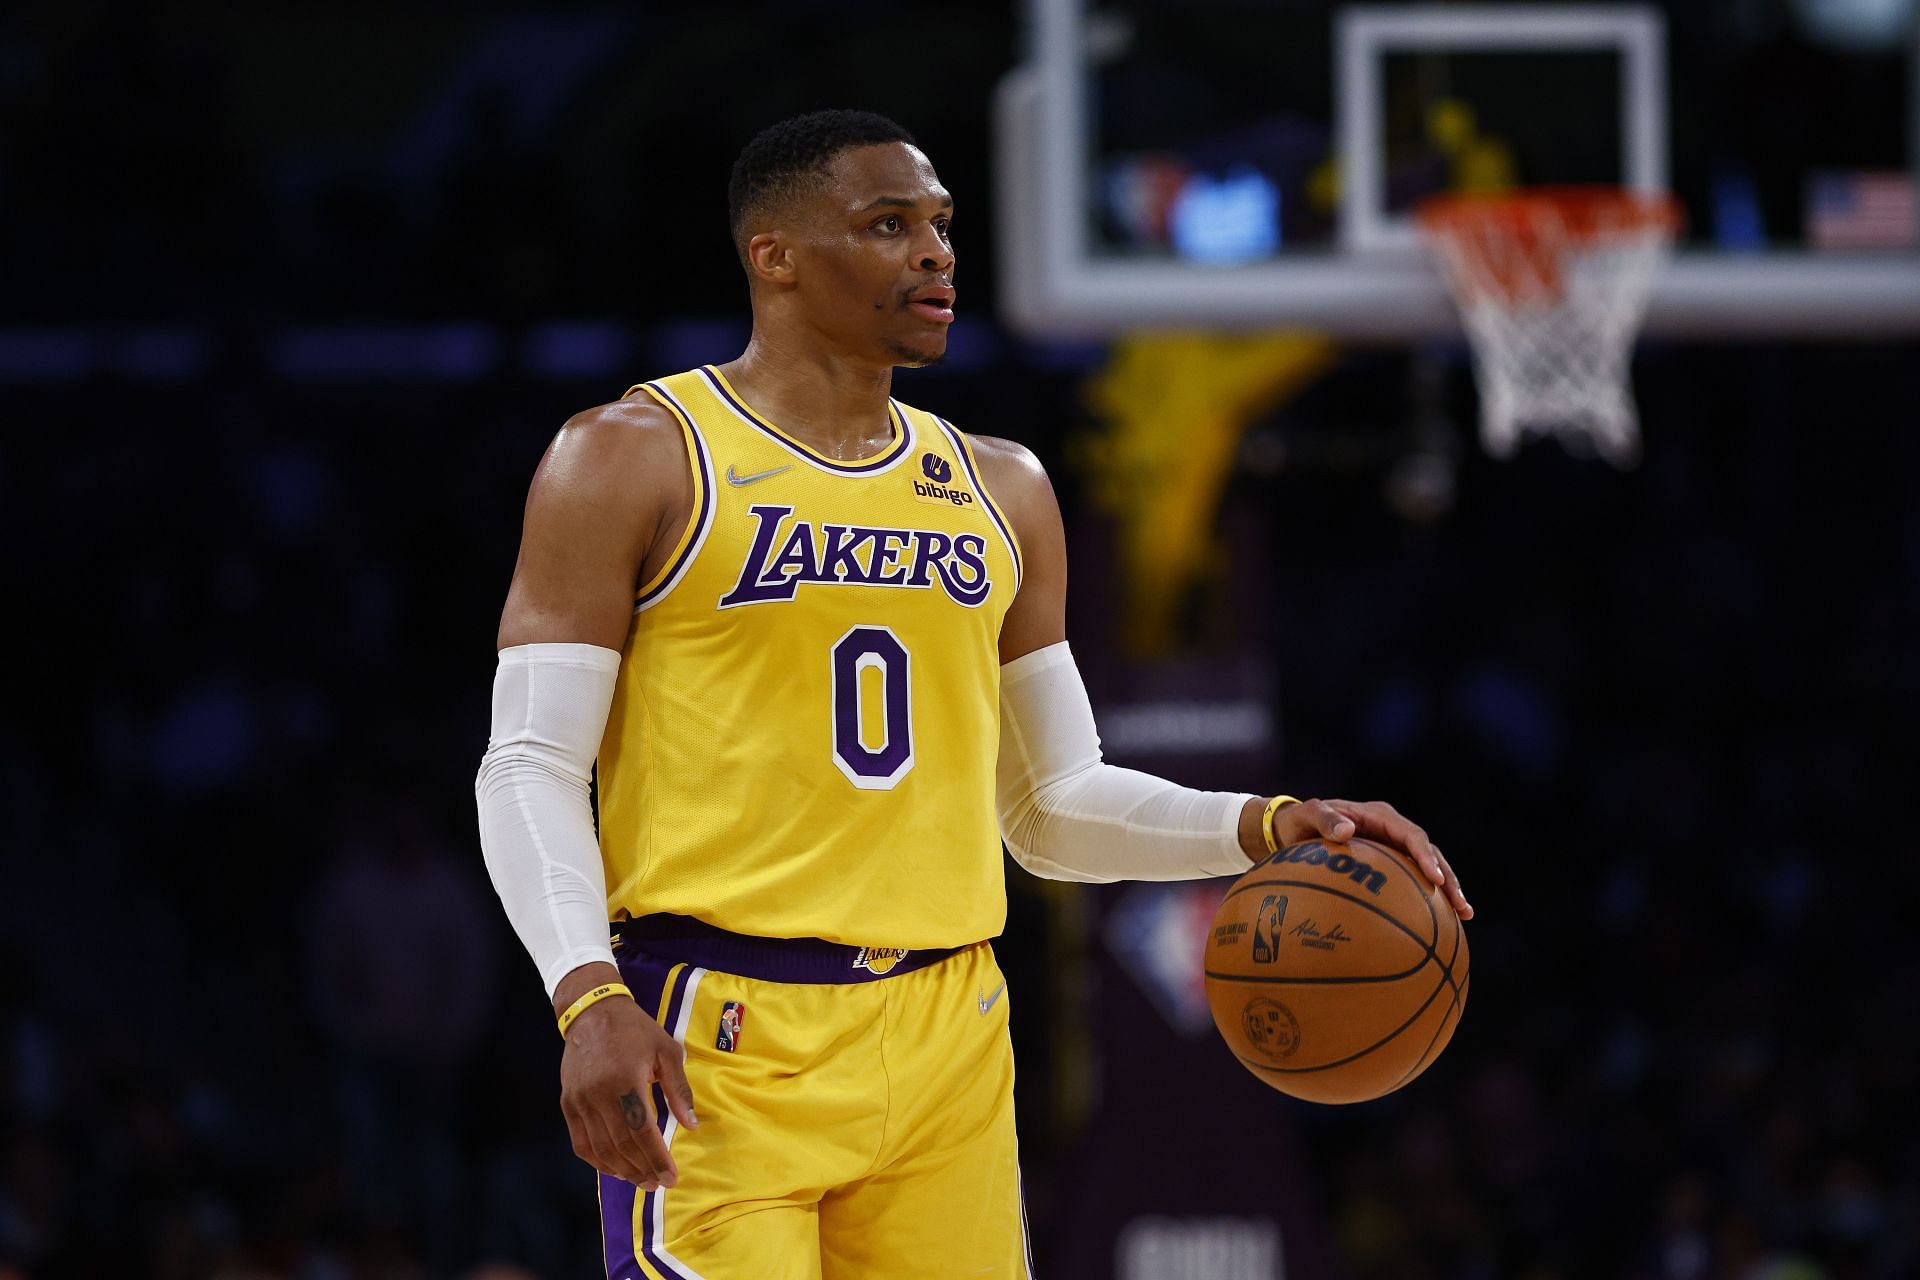 Russell Westbrook of the LA at Crypto.com Arena on March 1, 2022 in Los Angeles, California.